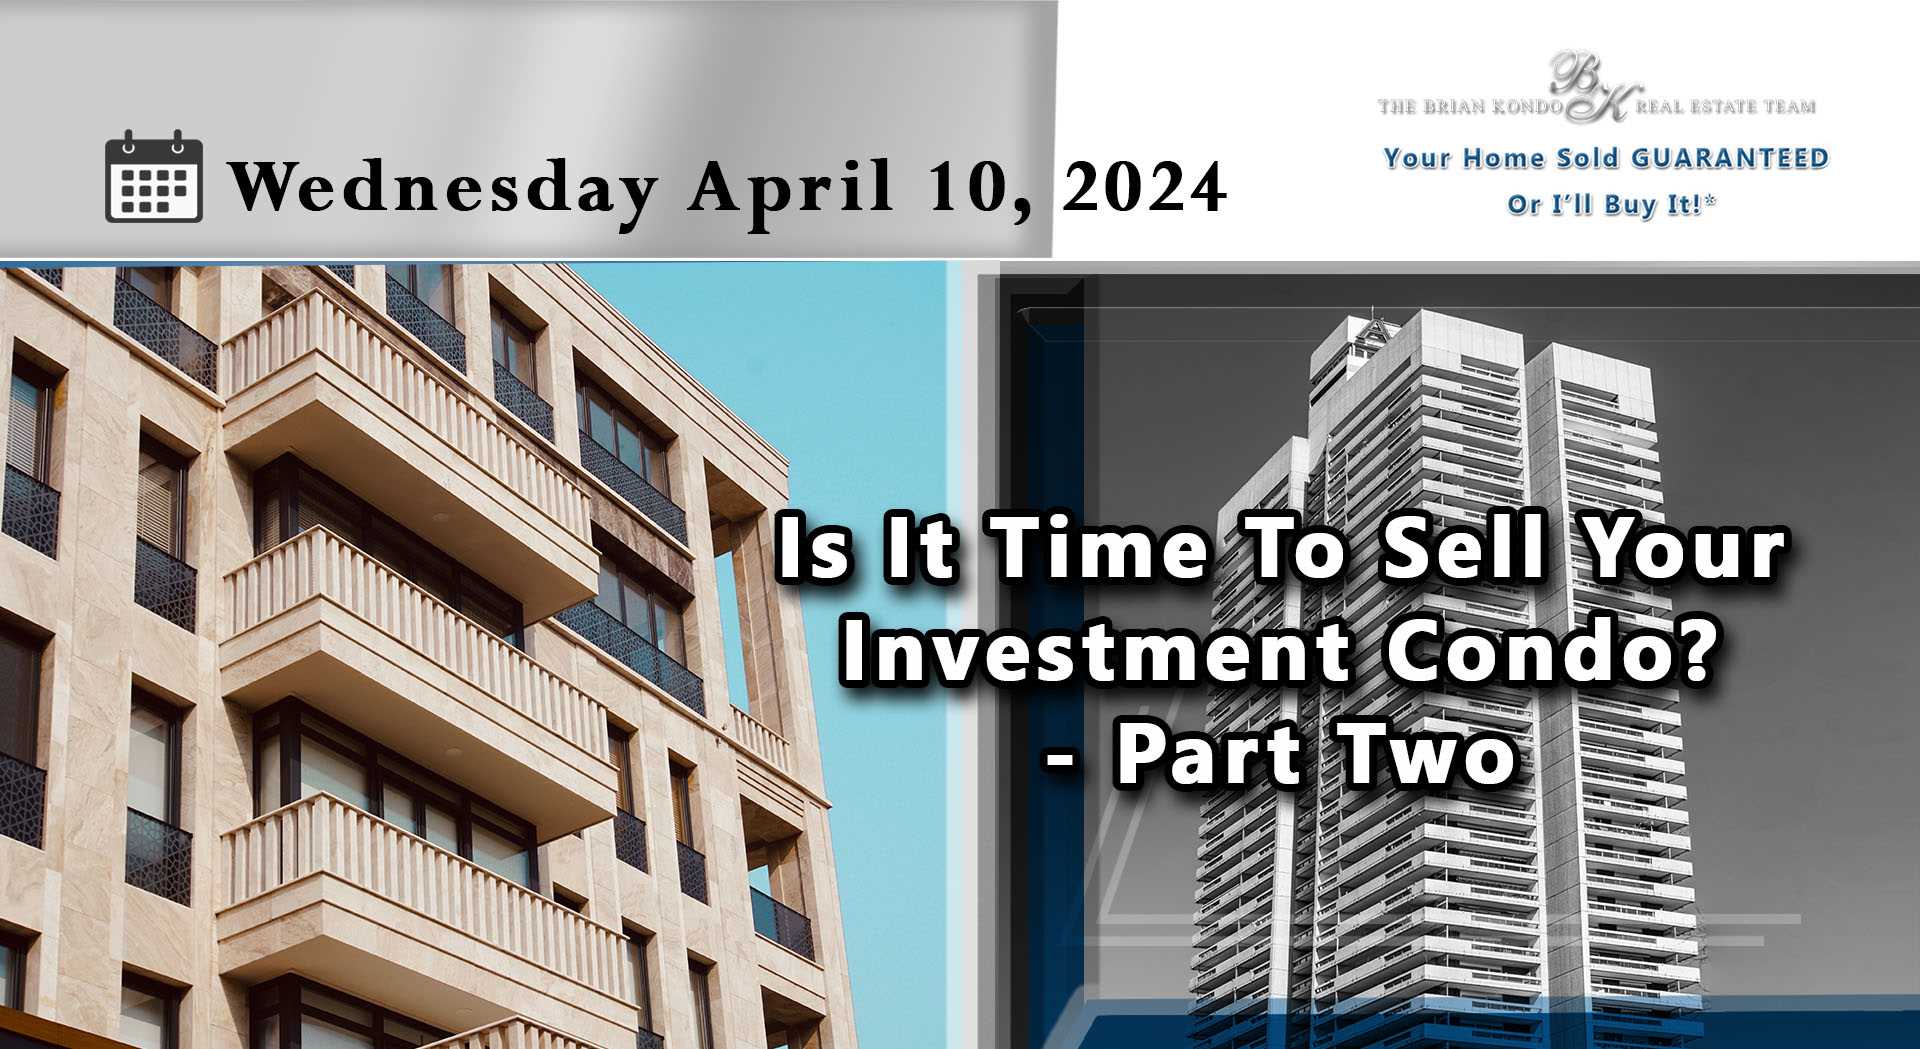 Is It Time To Sell Your Investment Condo? - Part Two